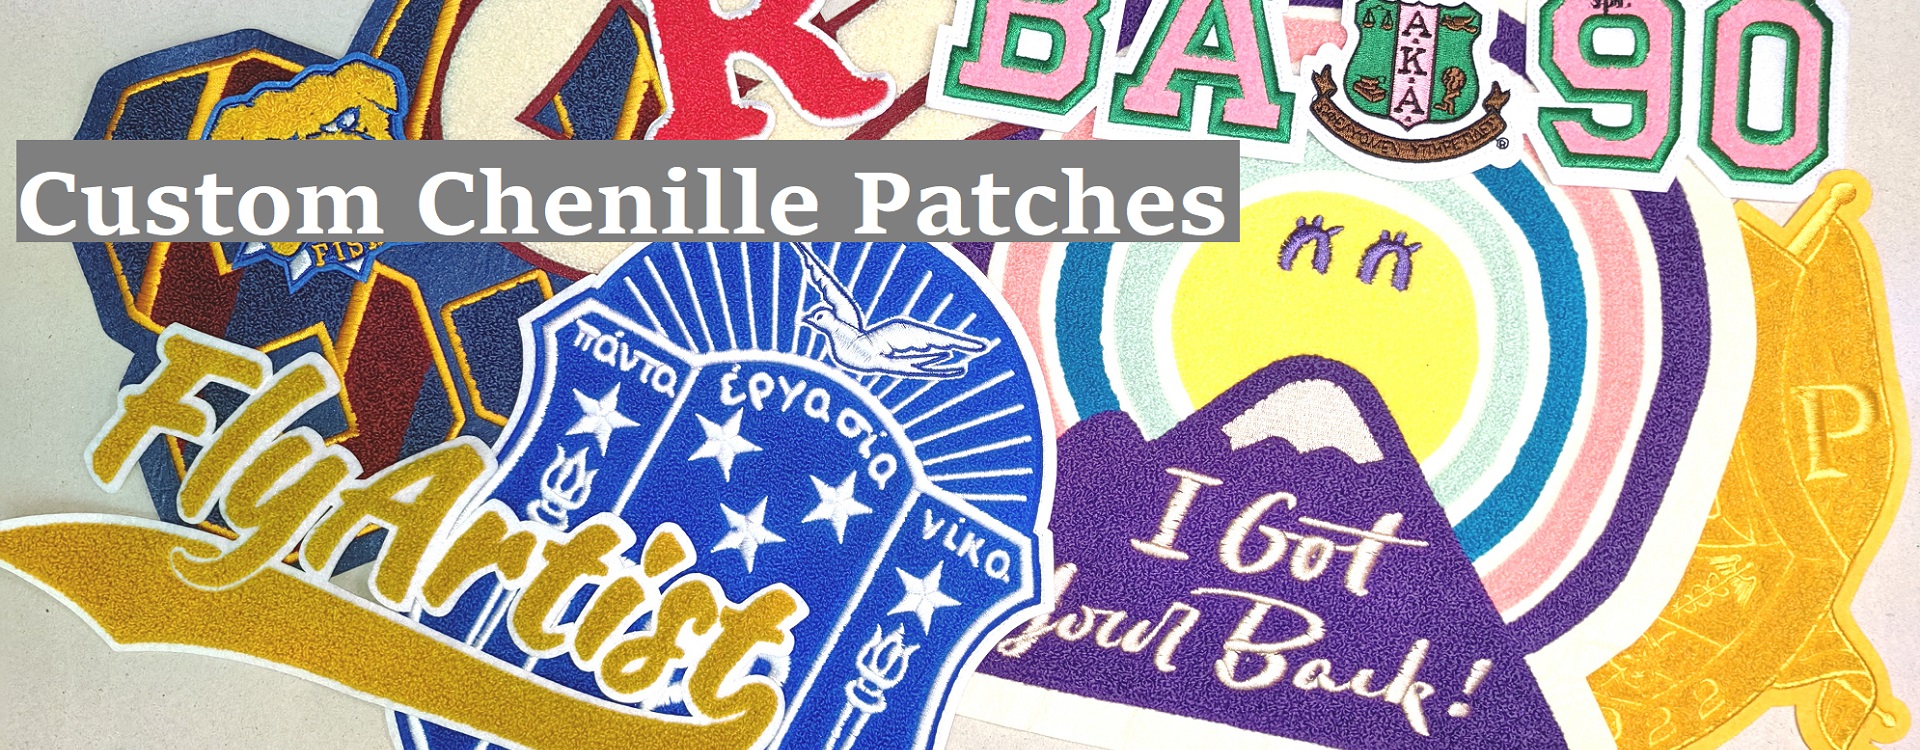 custom chenille patches